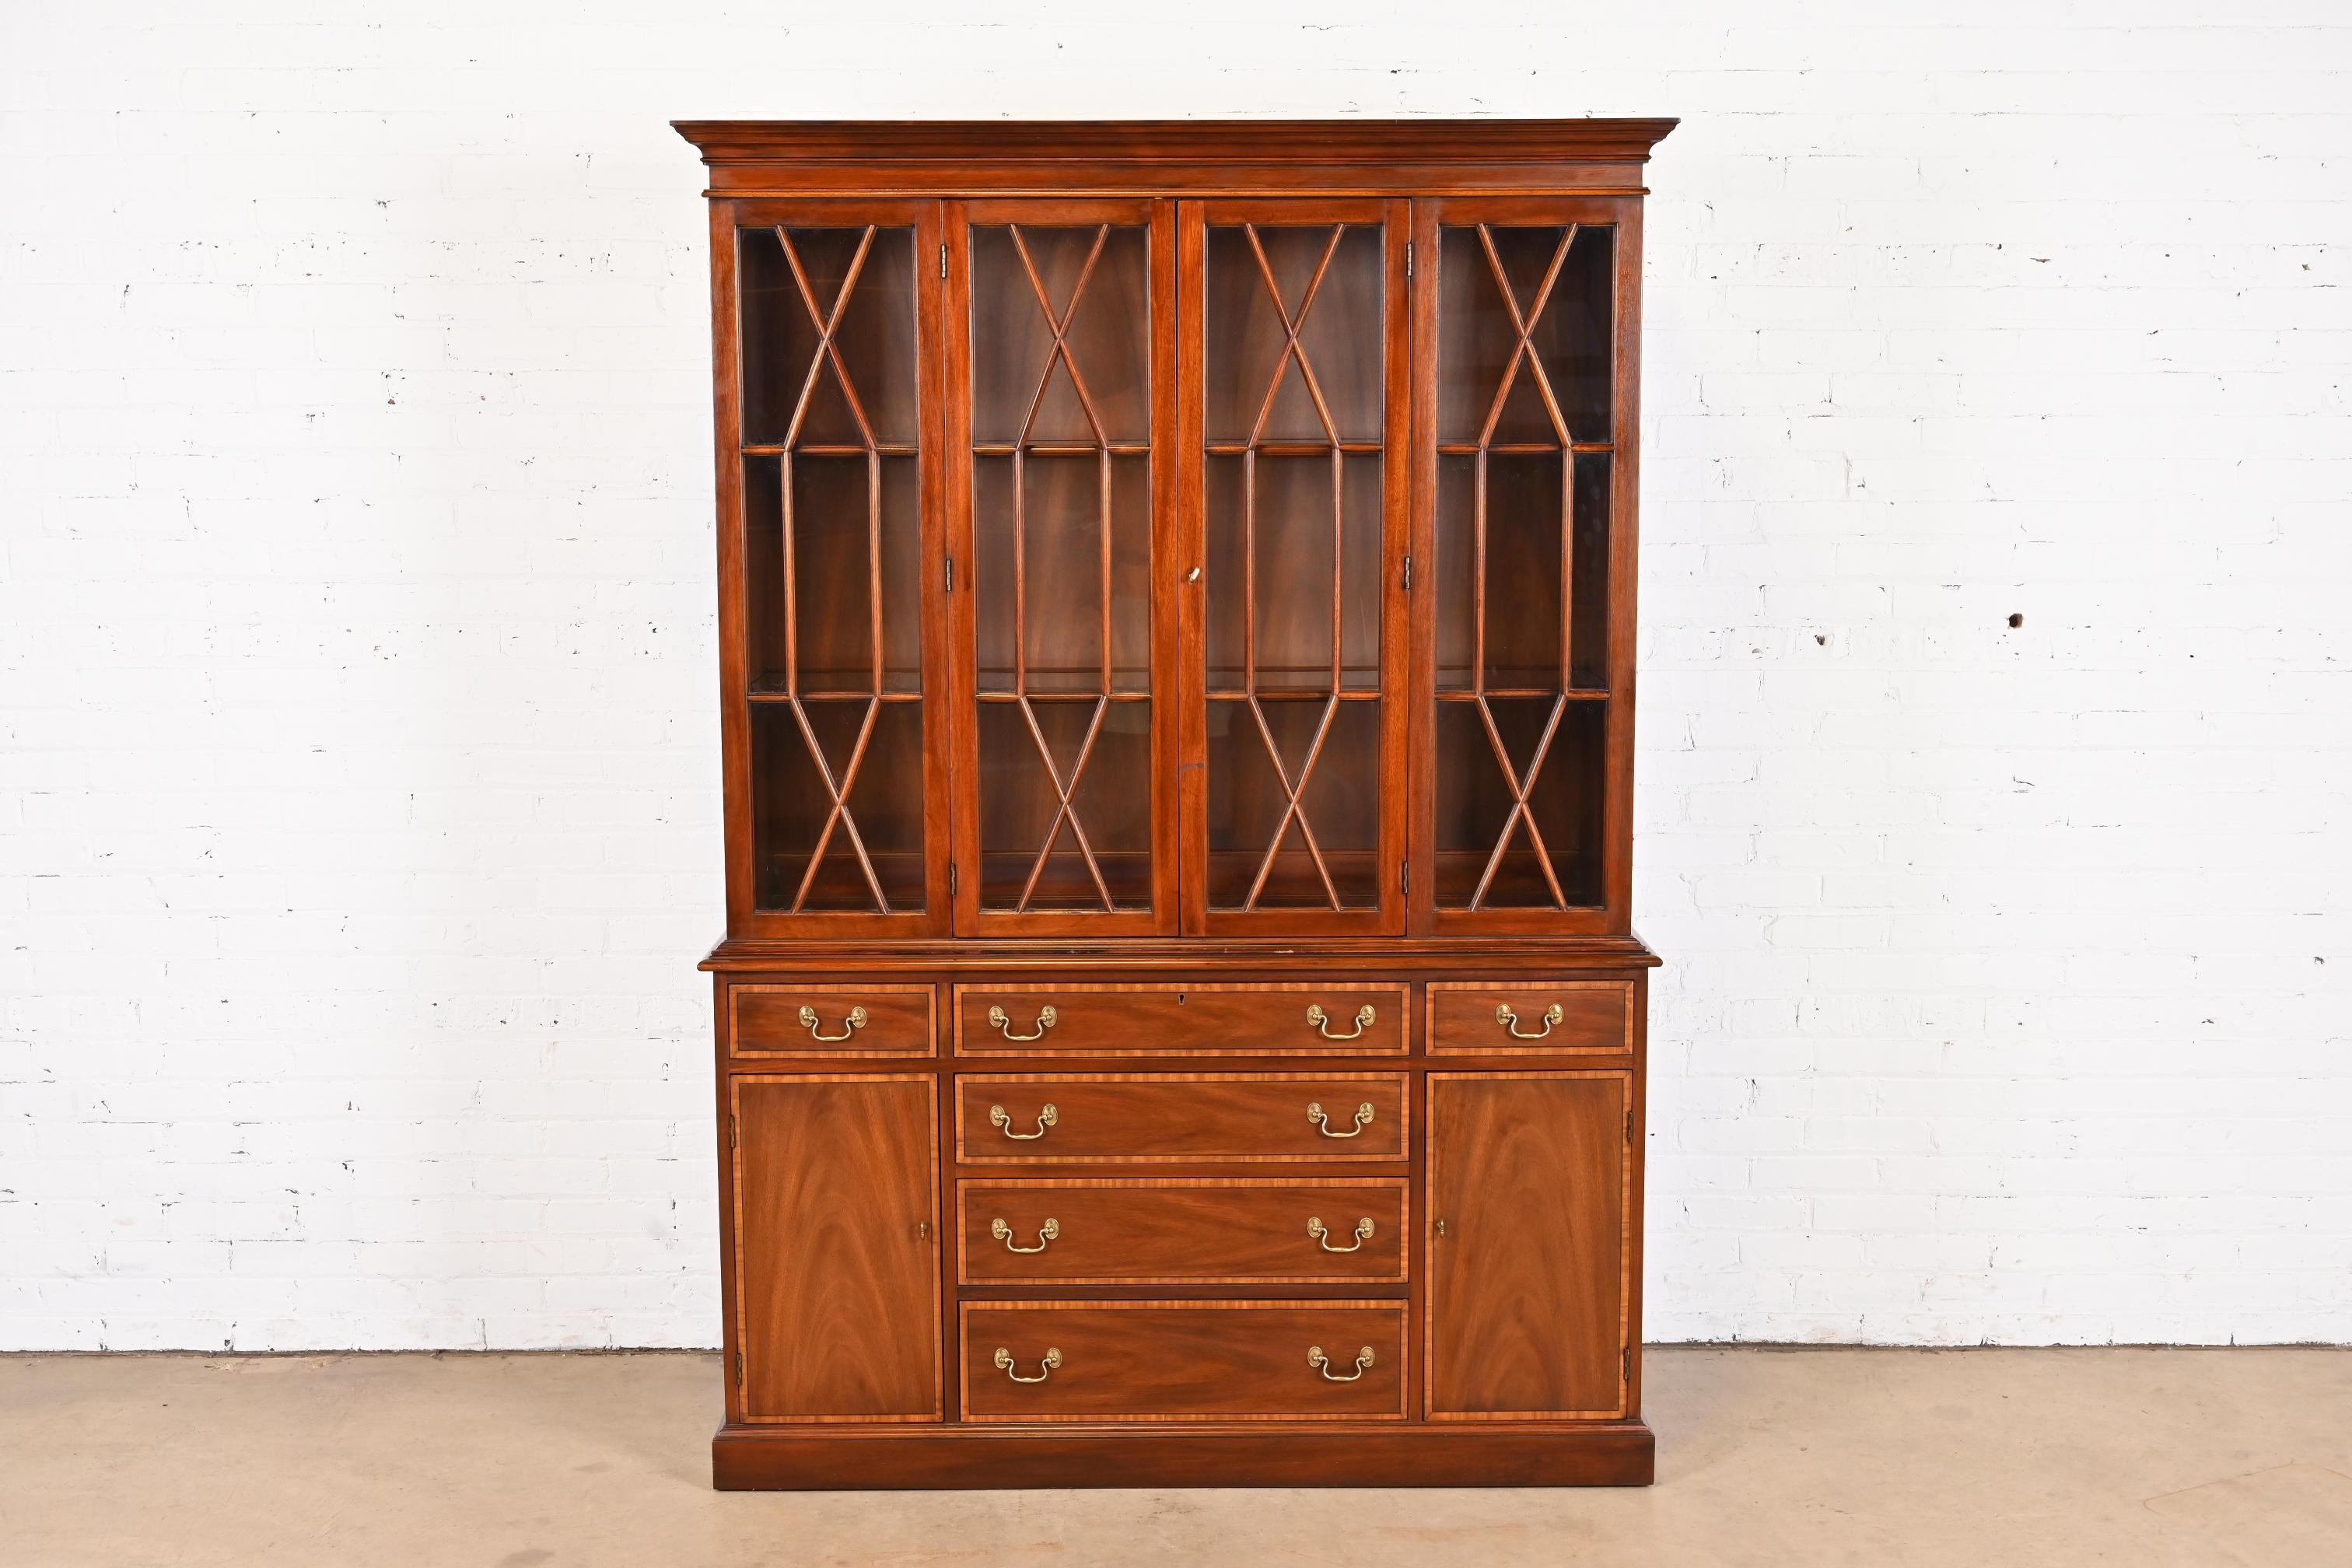 A gorgeous Georgian or Chippendale style lighted breakfront bookcase or dining cabinet

By Henkel Harris

USA, 1980

Mahogany, with satinwood banding, mullioned glass front doors, and original brass hardware. Lights have been tested and are